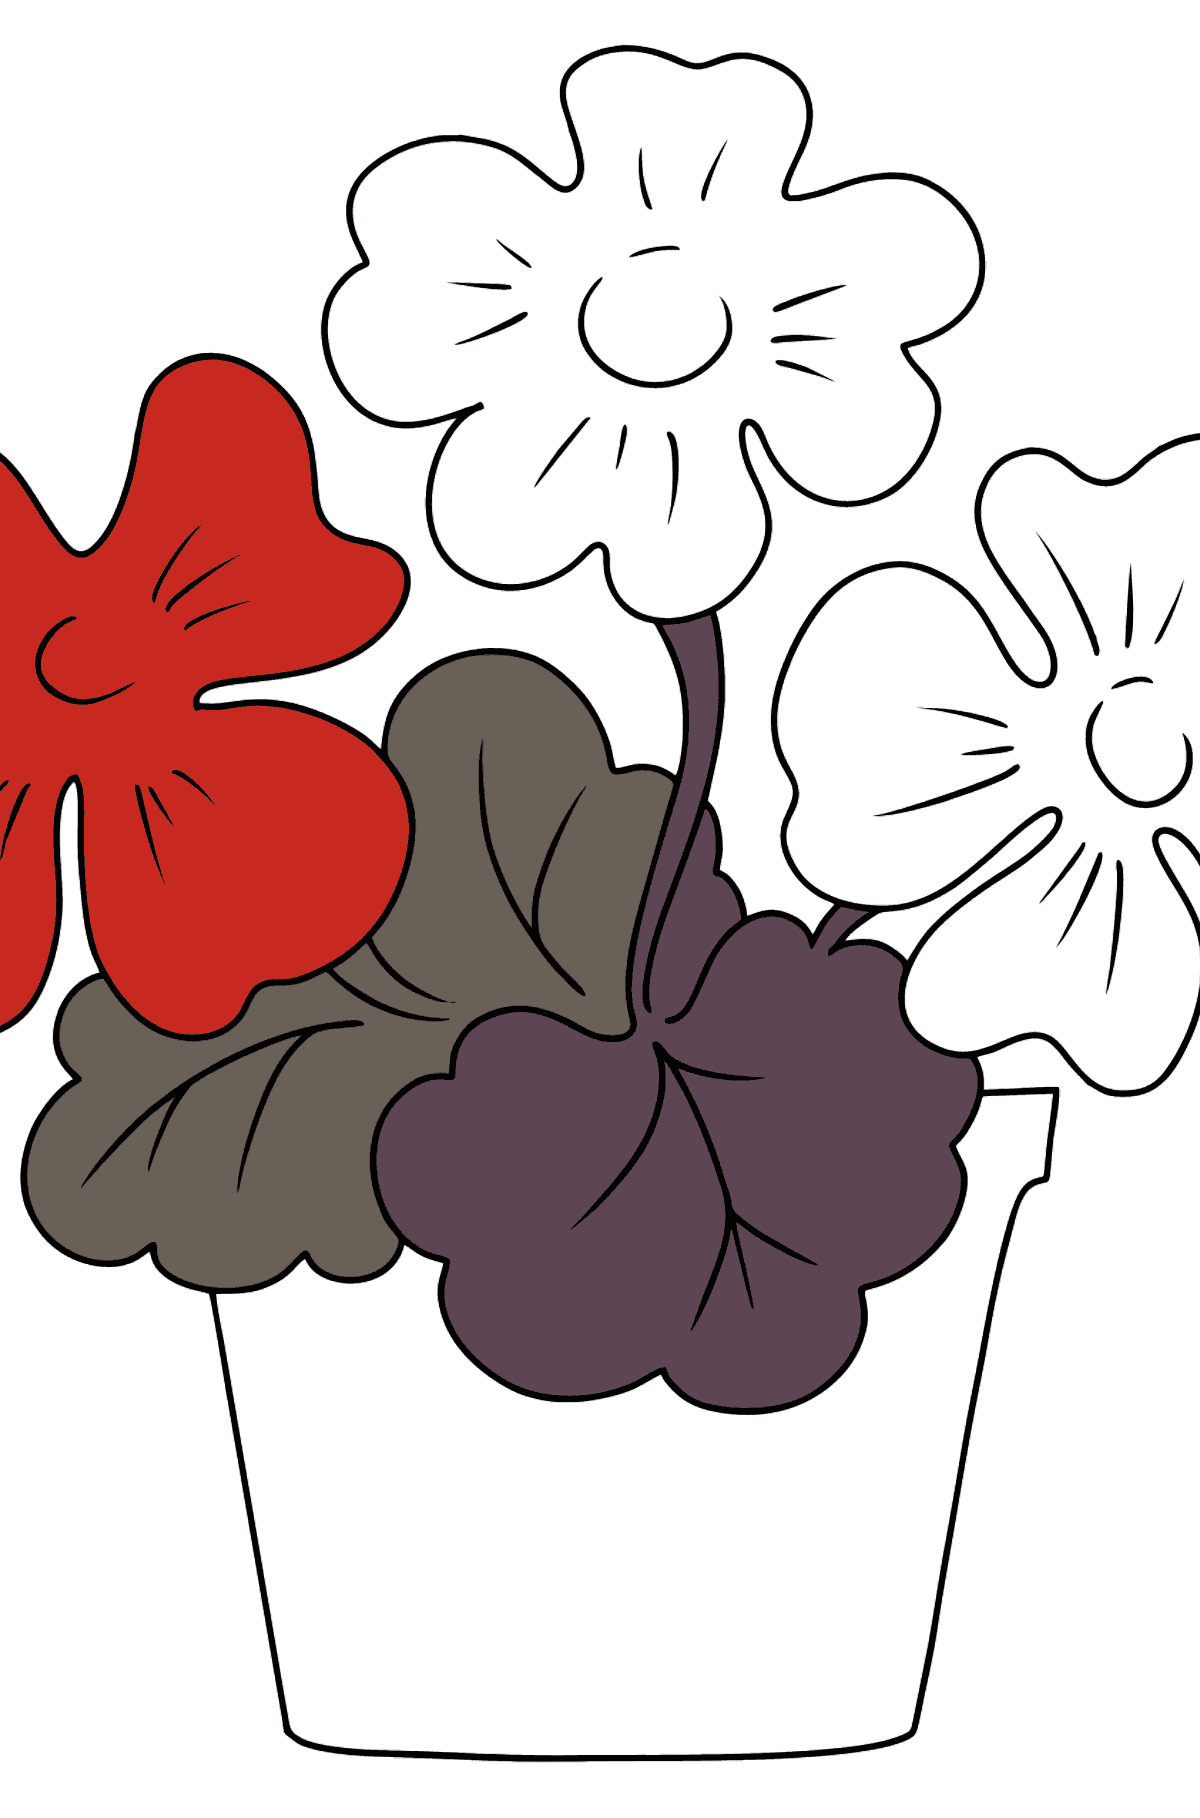 Coloring Page - flowers in a pot - Coloring Pages for Kids